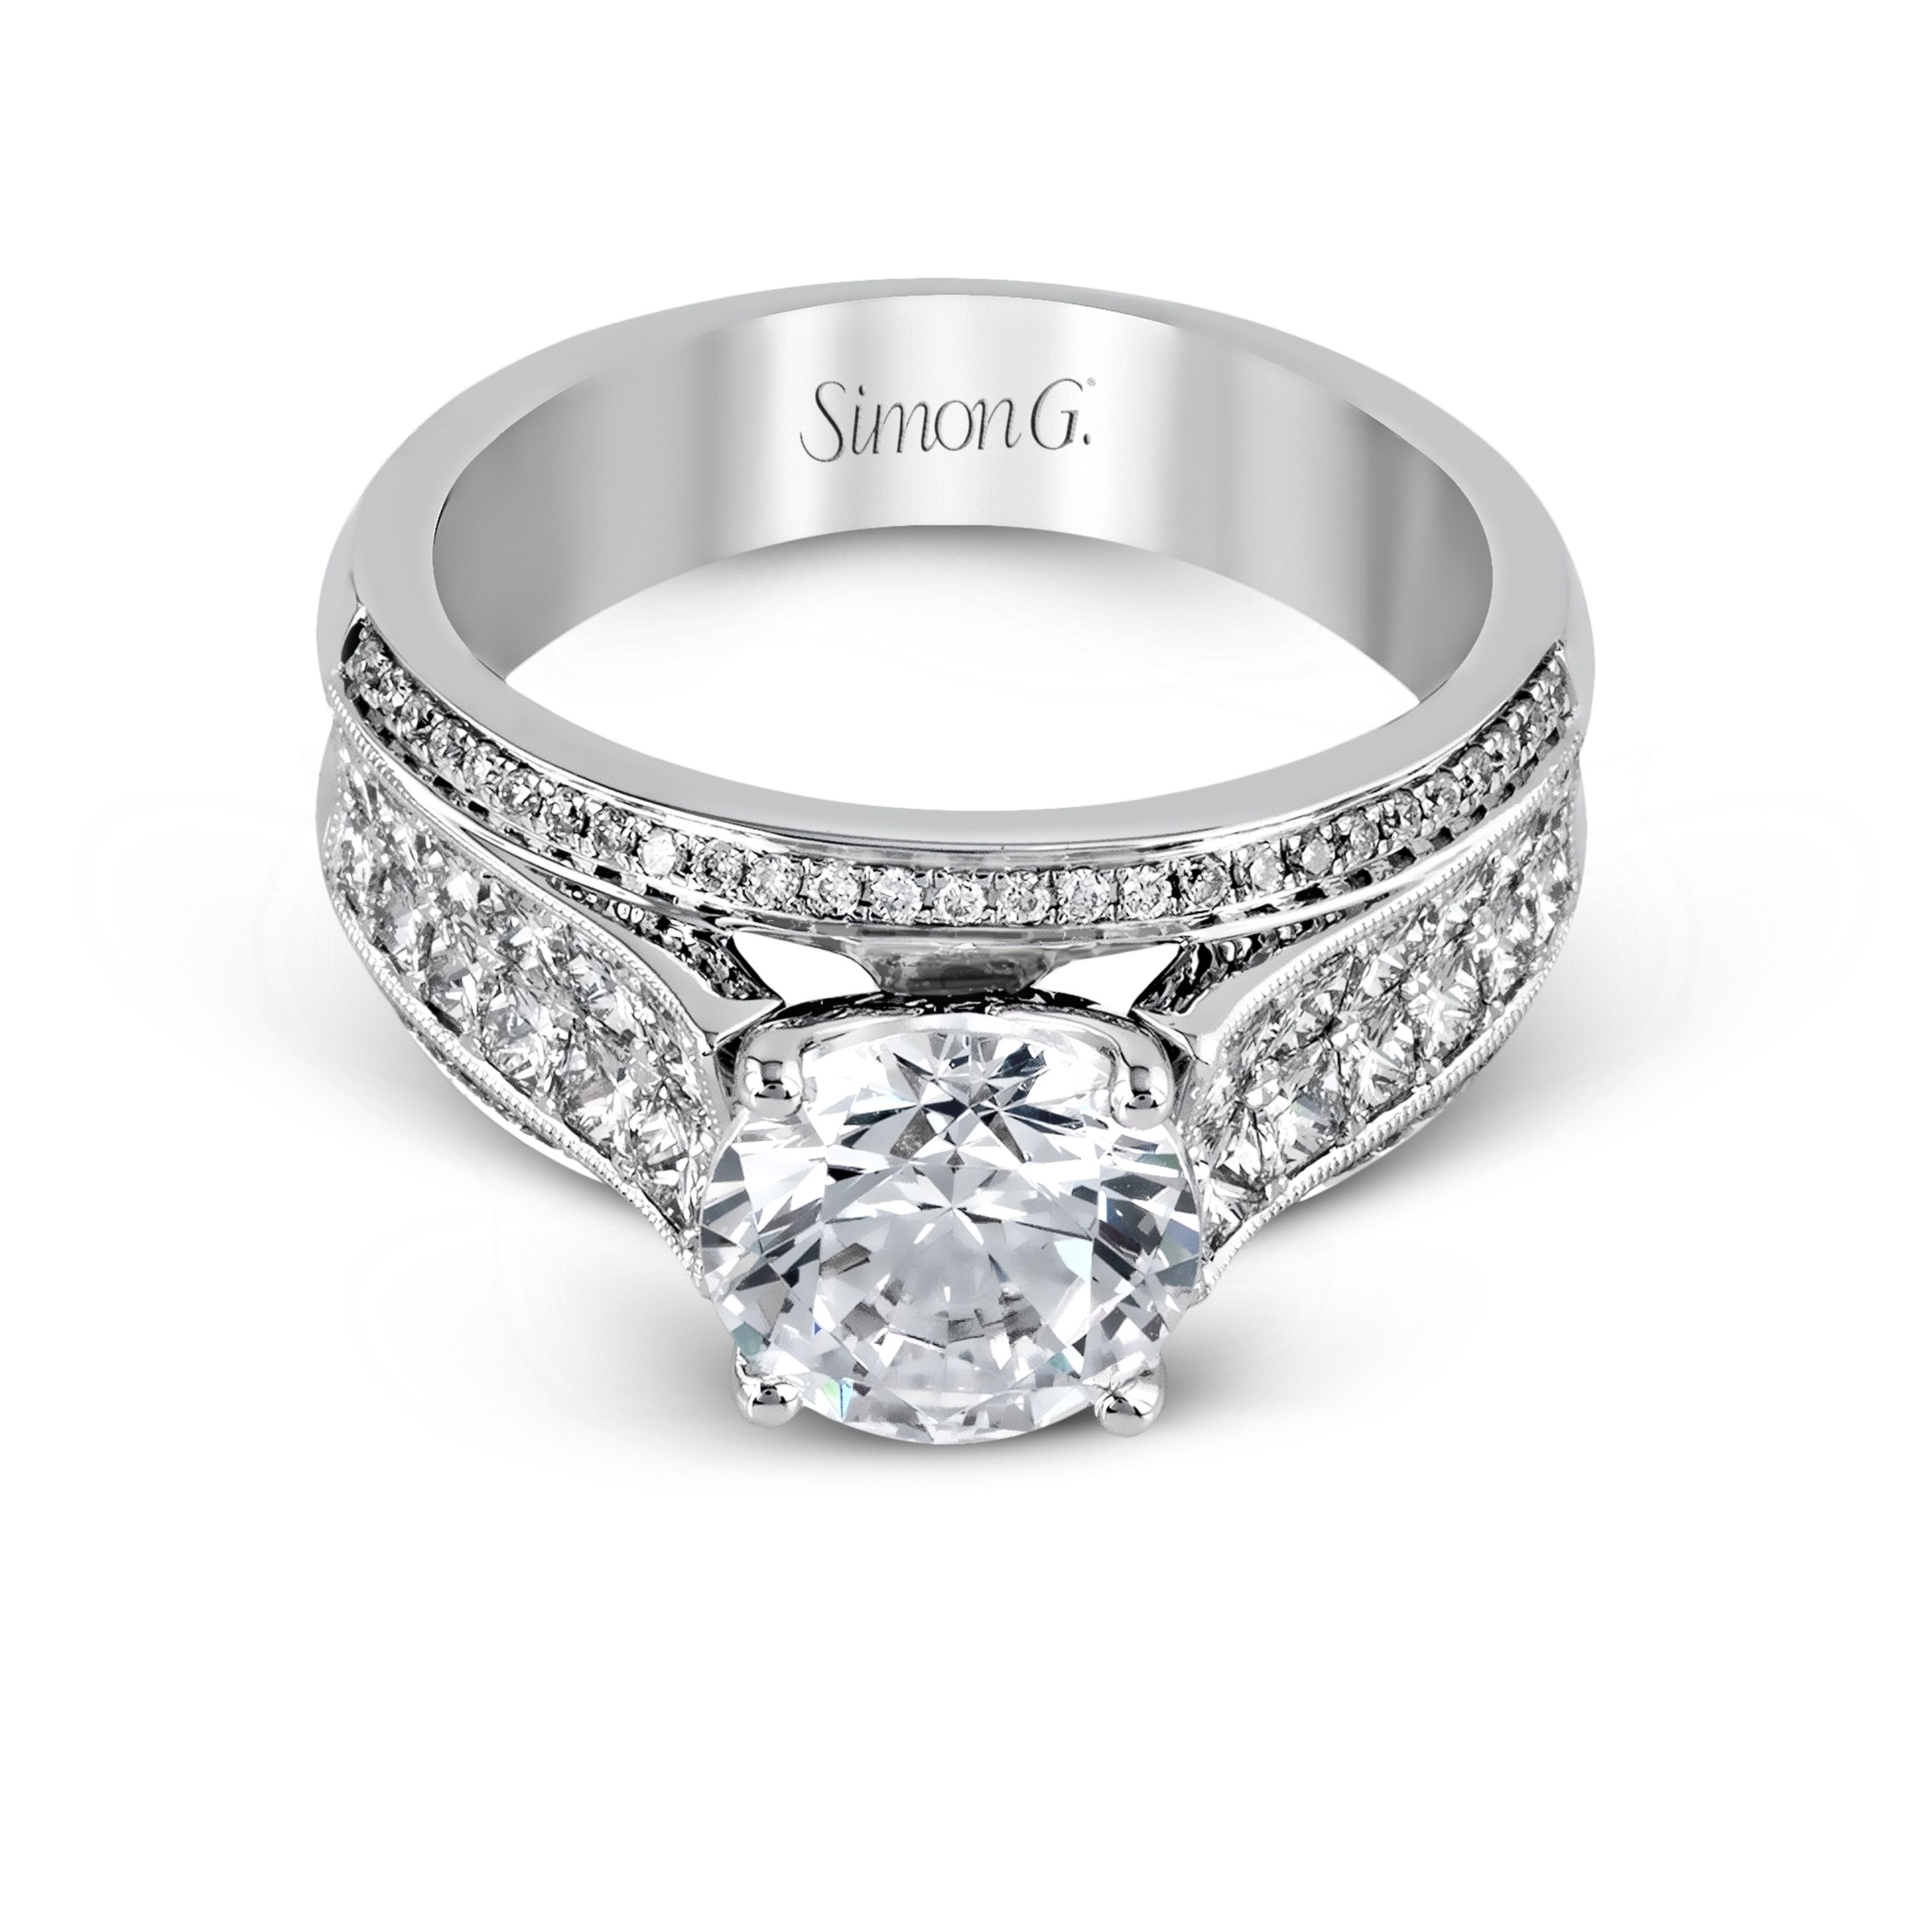 MR2425 Nocturnal Sophistication Collection Platinum Round Cut Engagement Ring